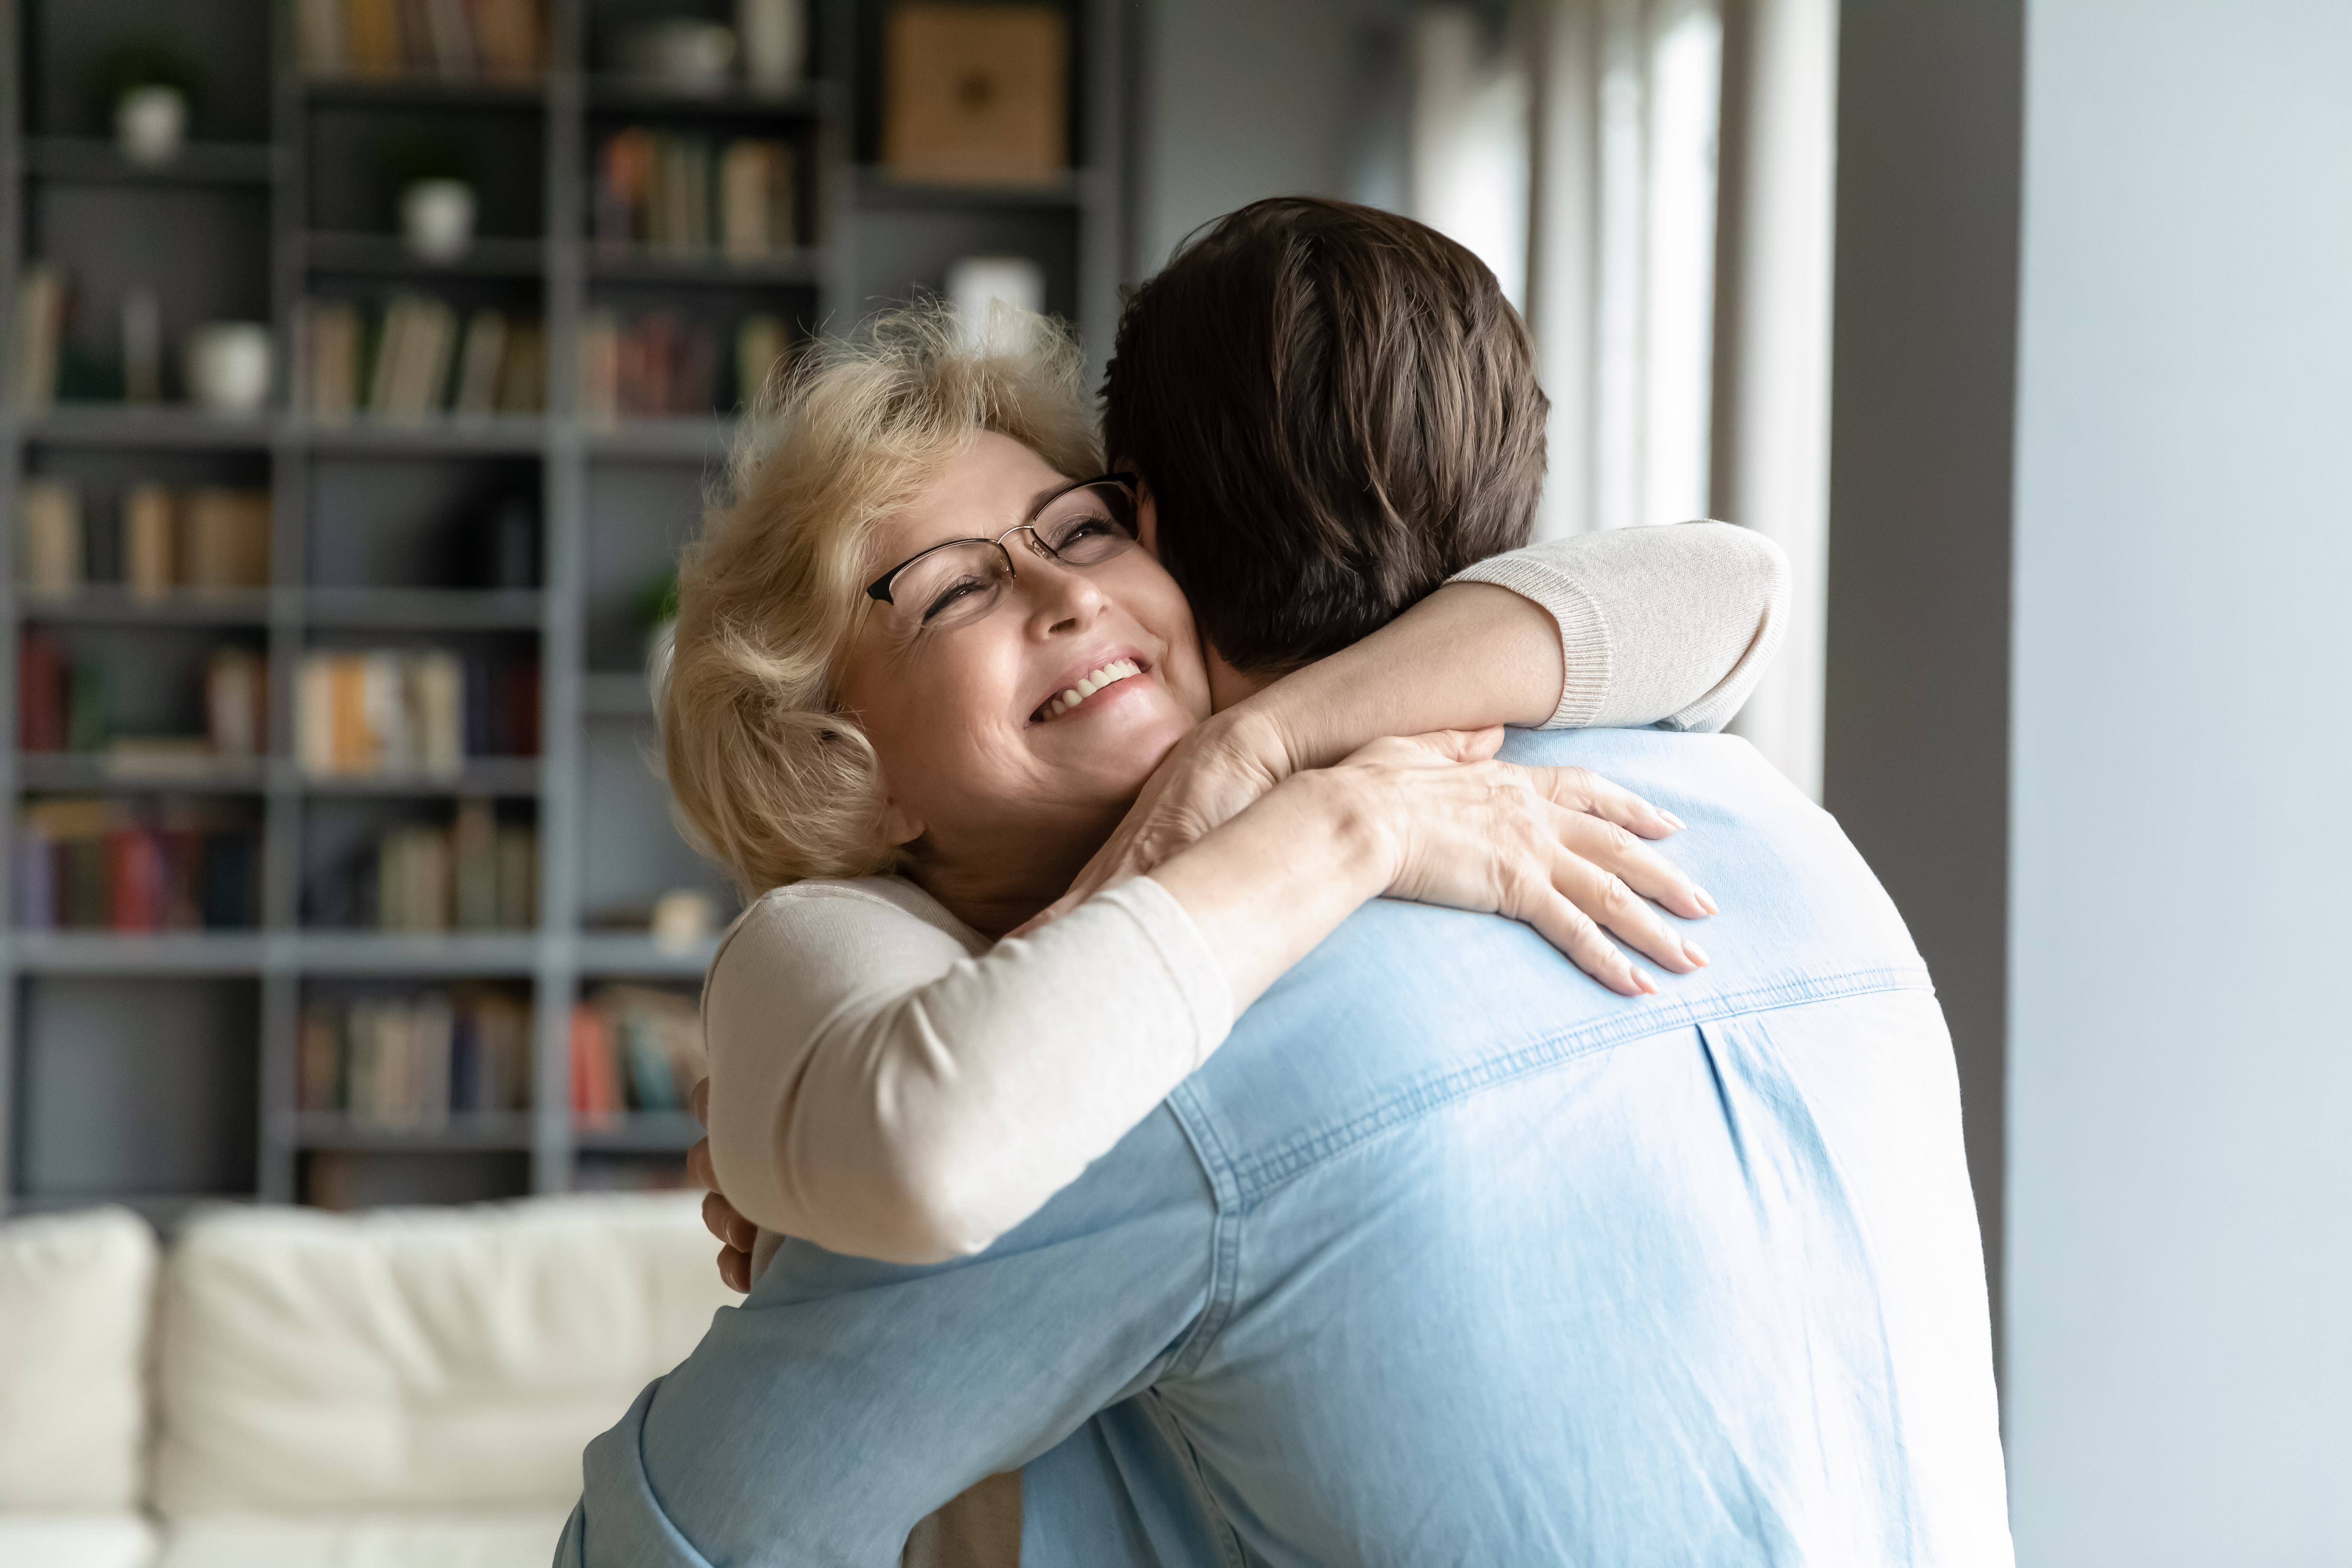 An adult son hugs his older mom | Source: Shutterstock